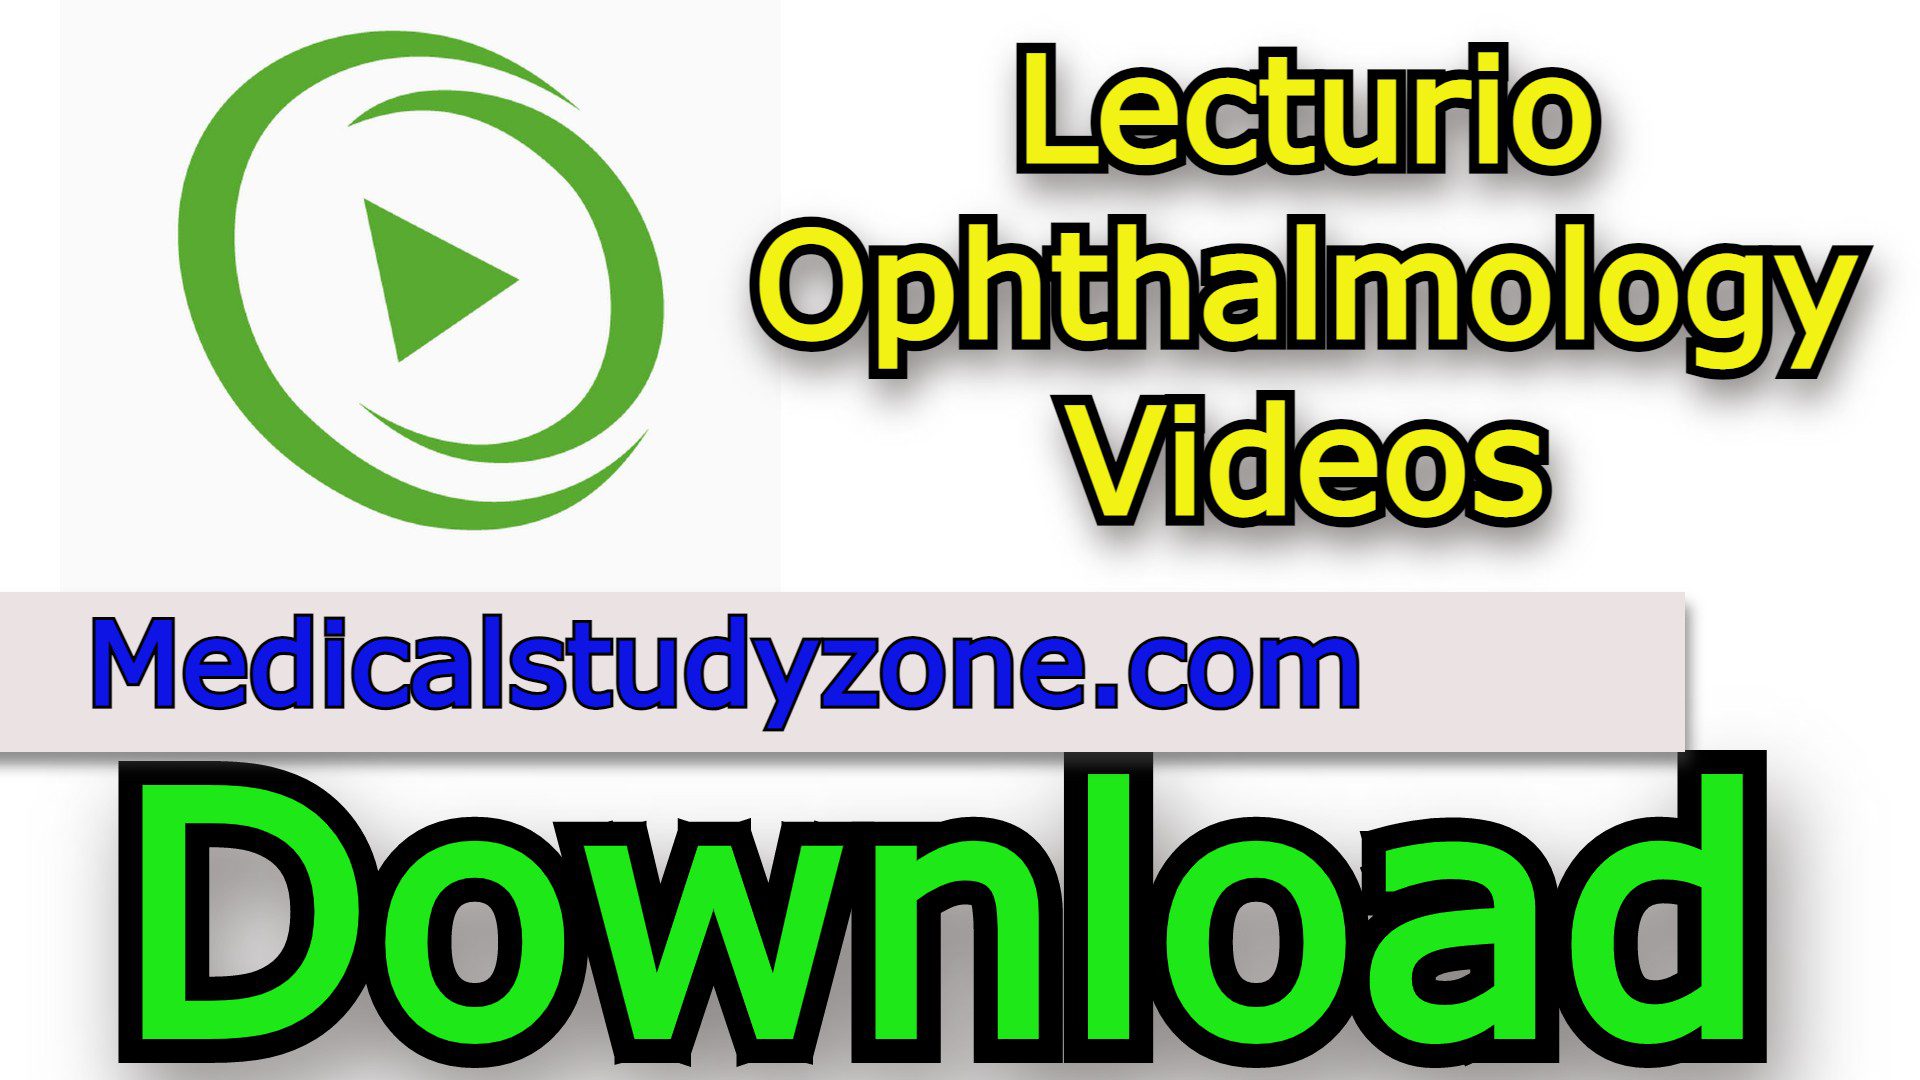 Lecturio Ophthalmology Videos 2021 Free Download